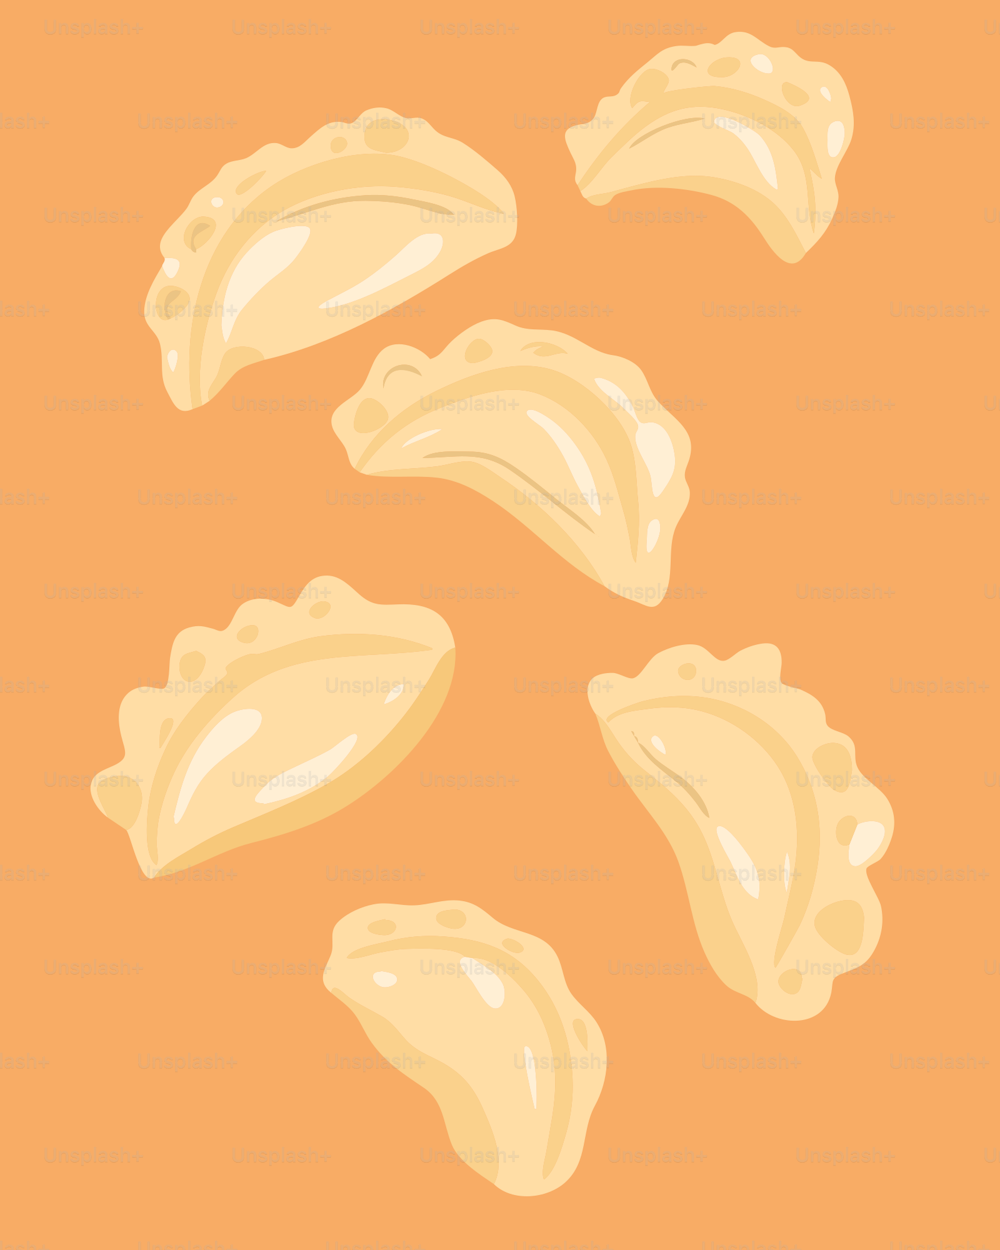 a group of dumplings sitting on top of an orange surface